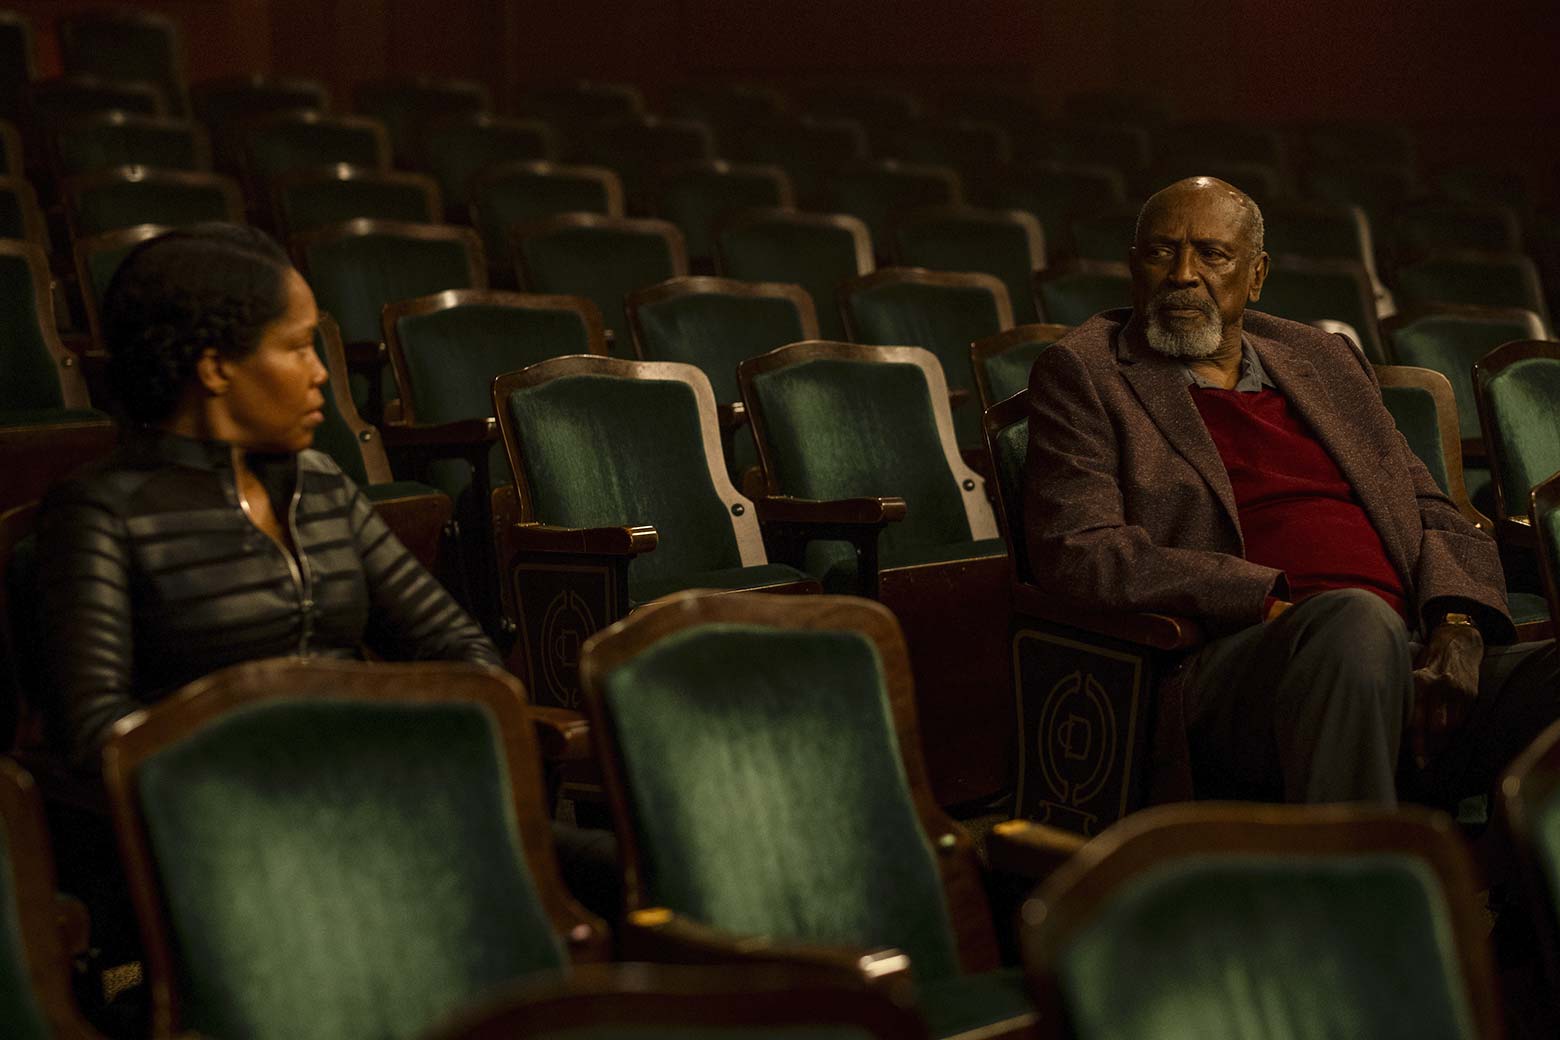 Regina King and Louis Gossett Jr. stare at each other across auditorium seating in this still from Watchmen.